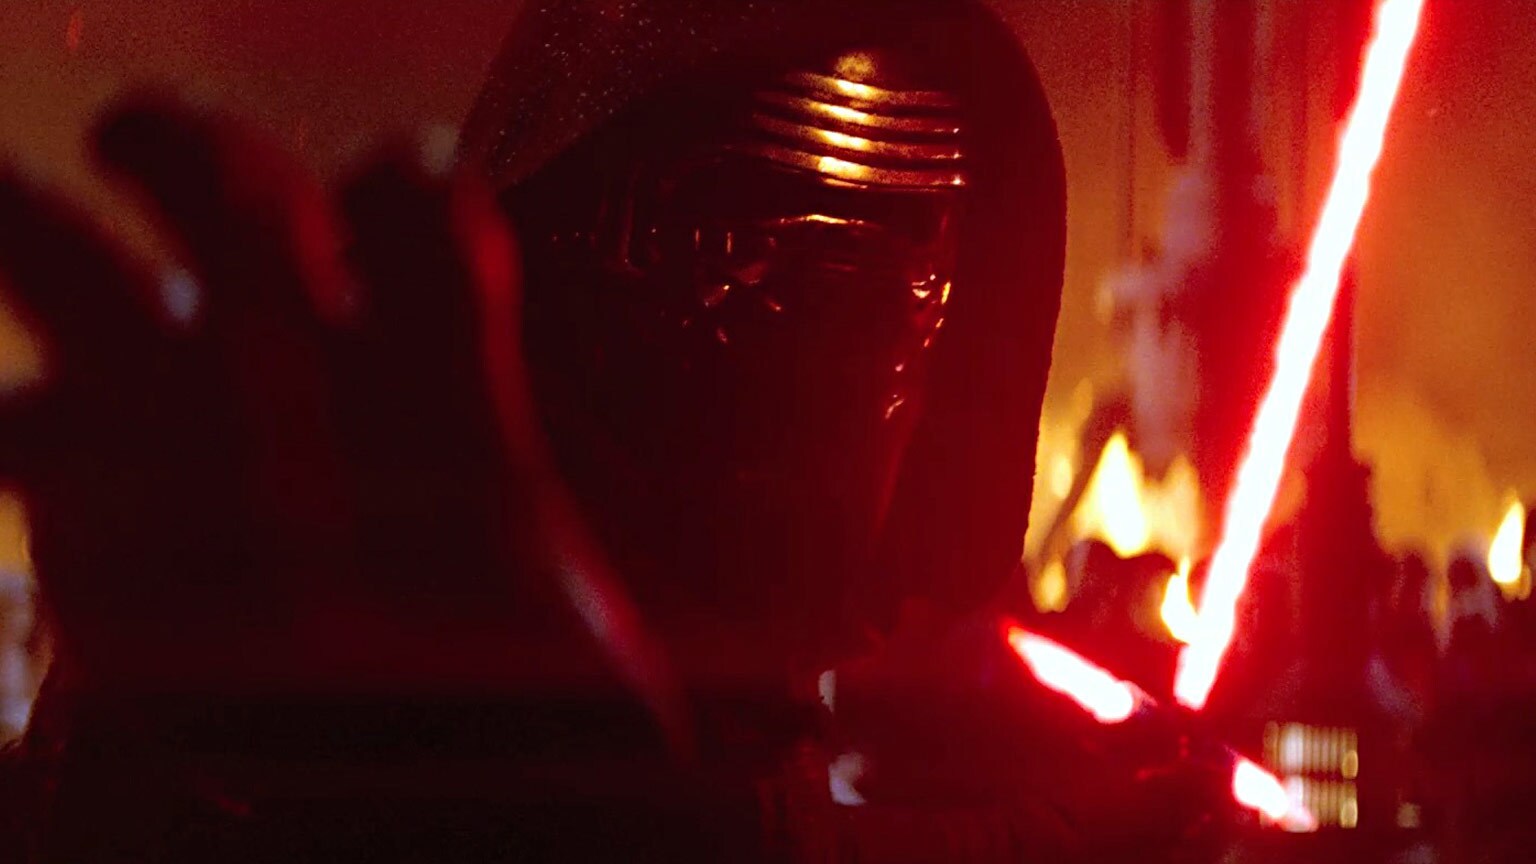 The Introduction of Kylo Ren and the Meaning of a Mask